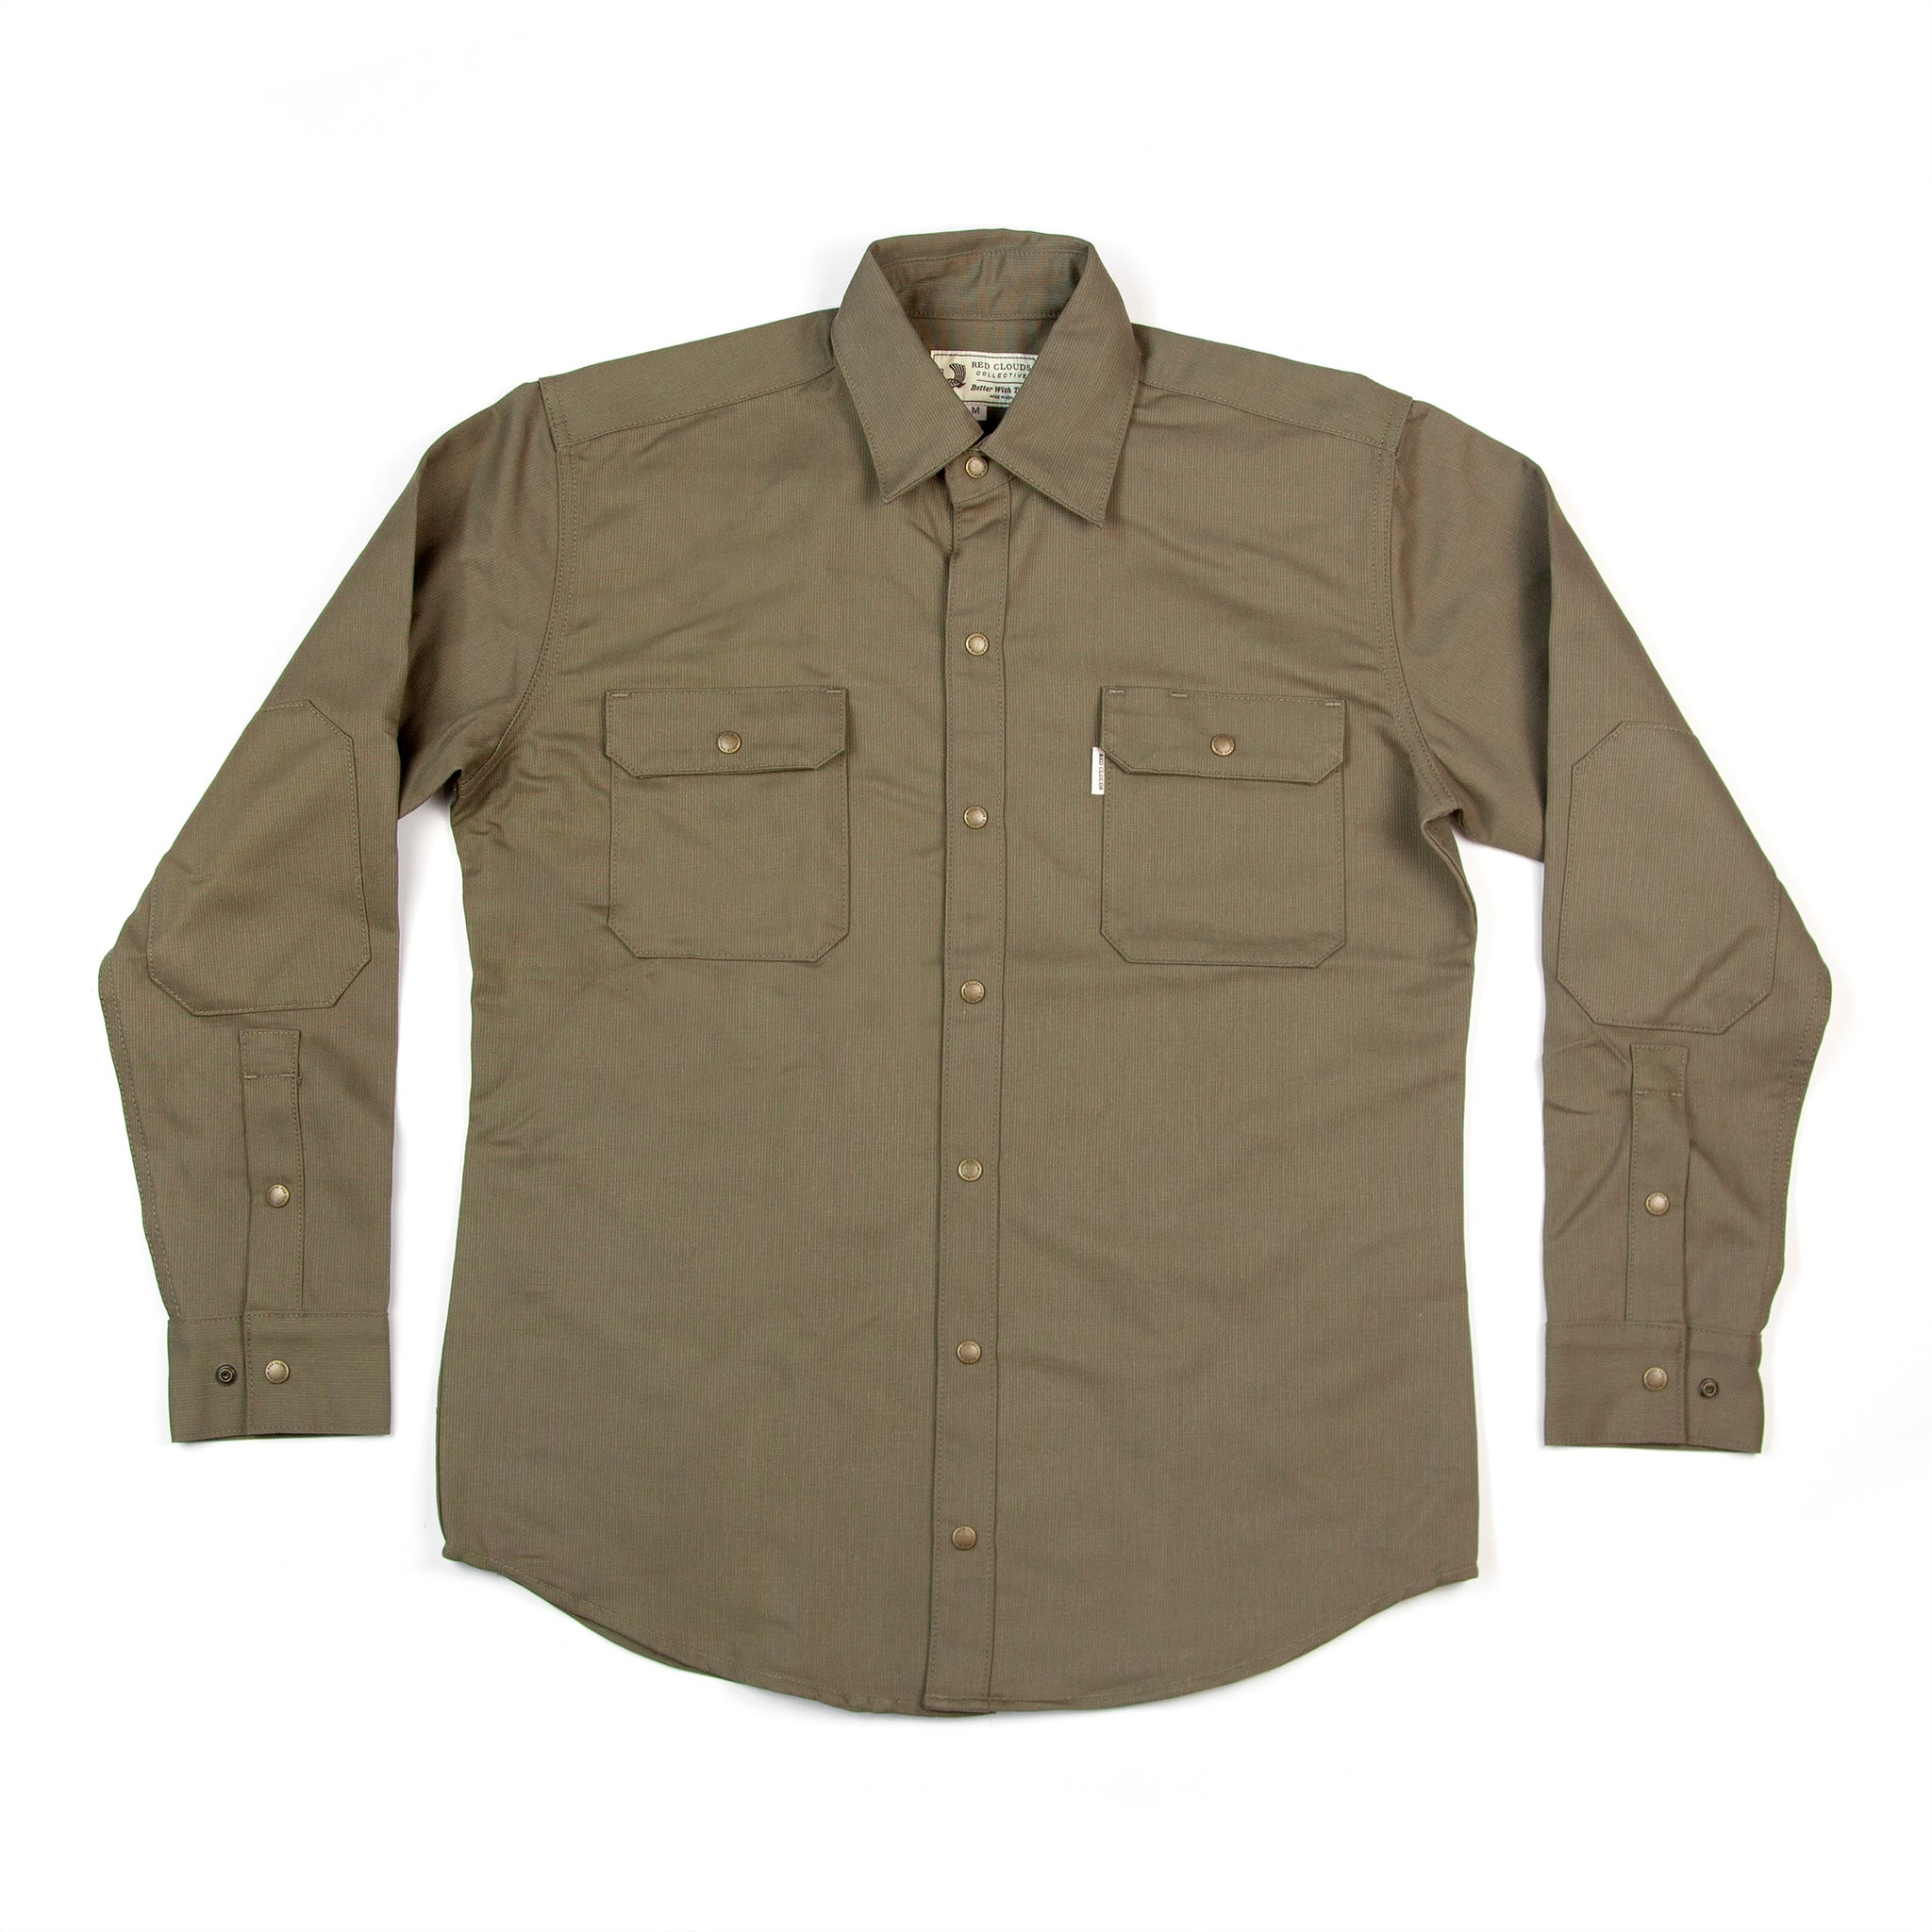 Witham Work Shirt - Olive Twill - Red Clouds Collective - Made in